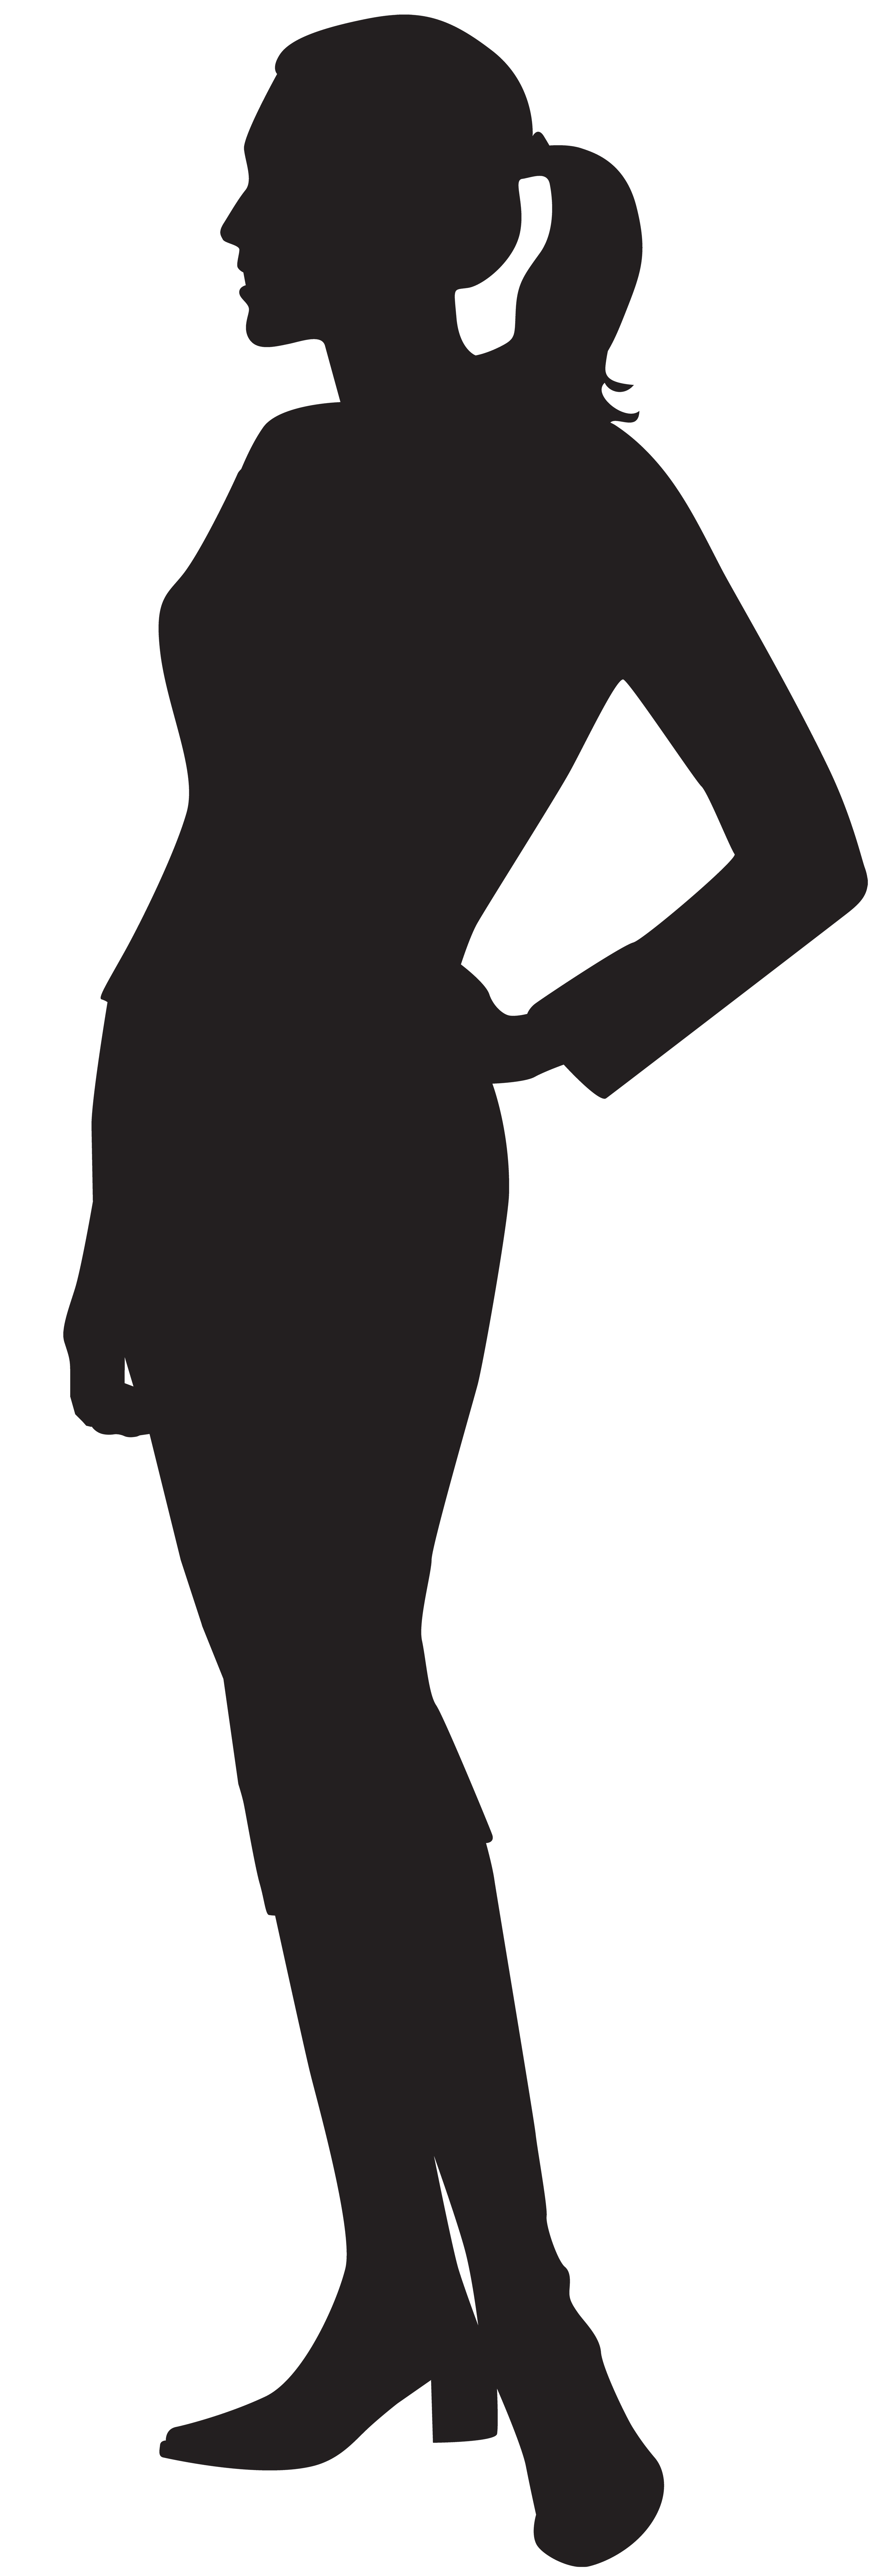 silhouette standing woman png
